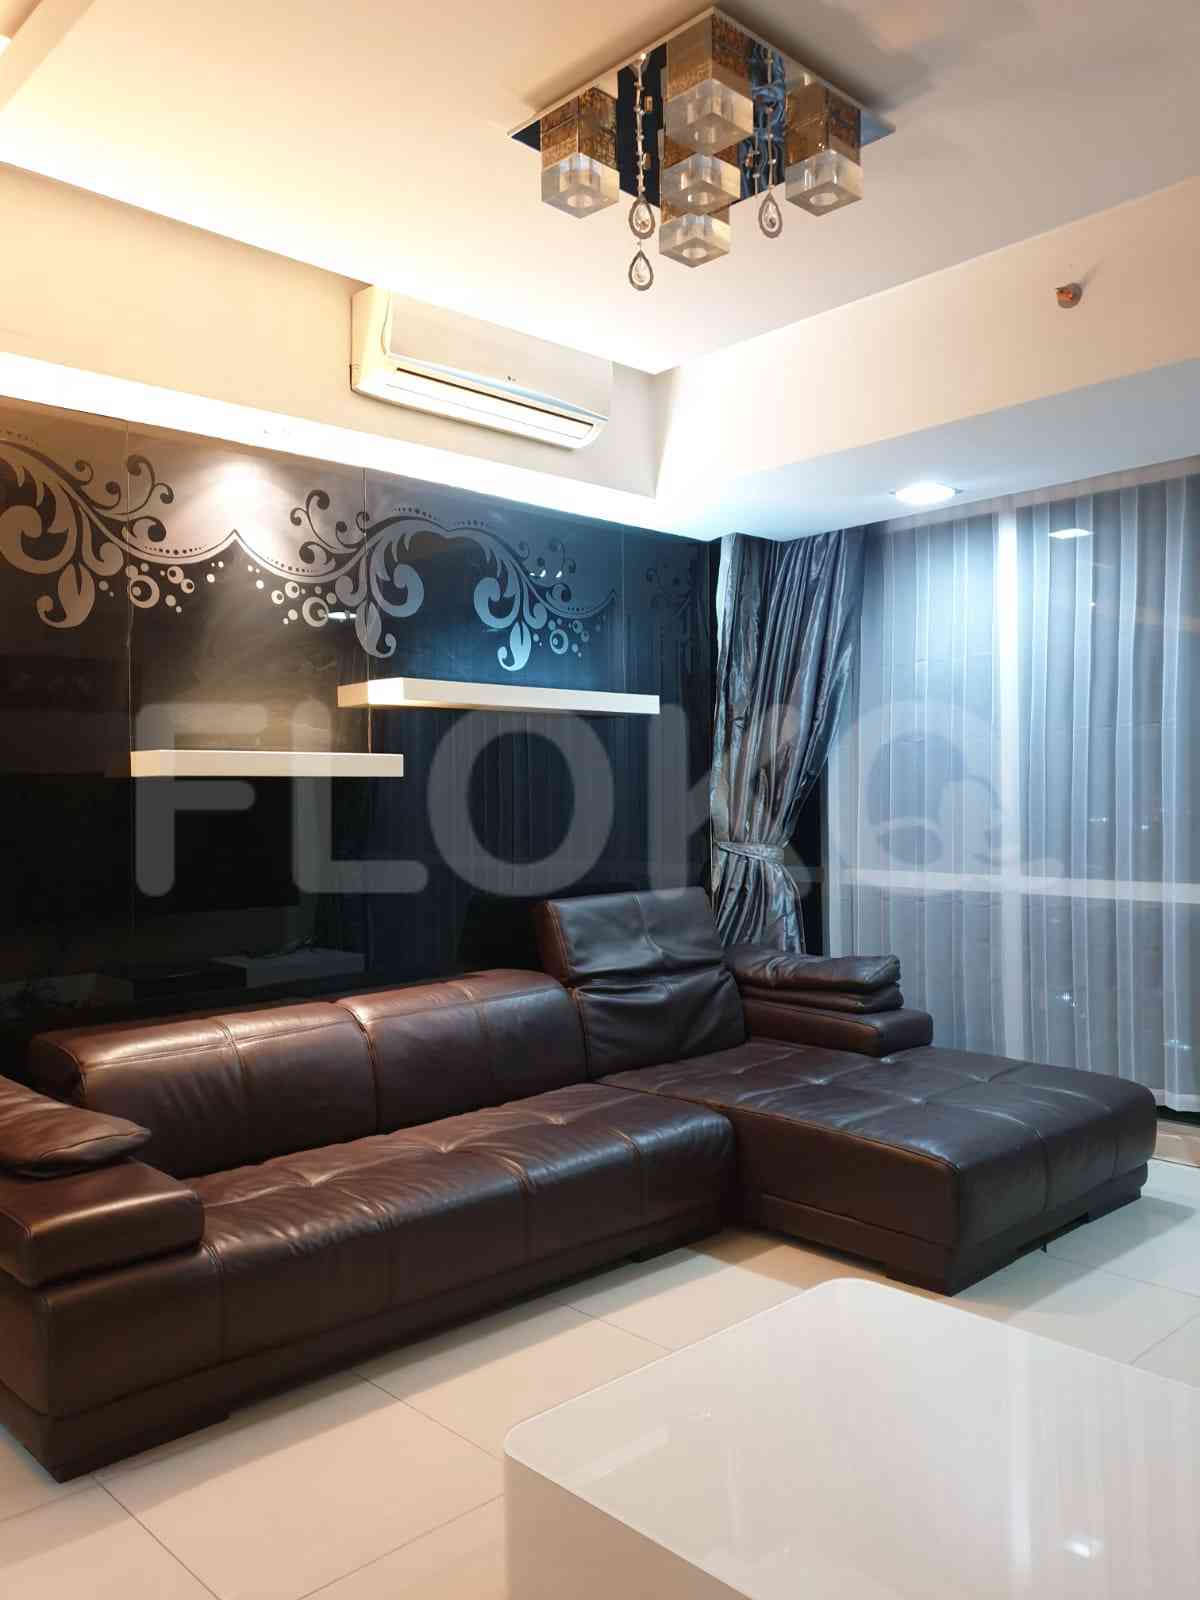 3 Bedroom on 16th Floor for Rent in Kemang Village Residence - fked77 2